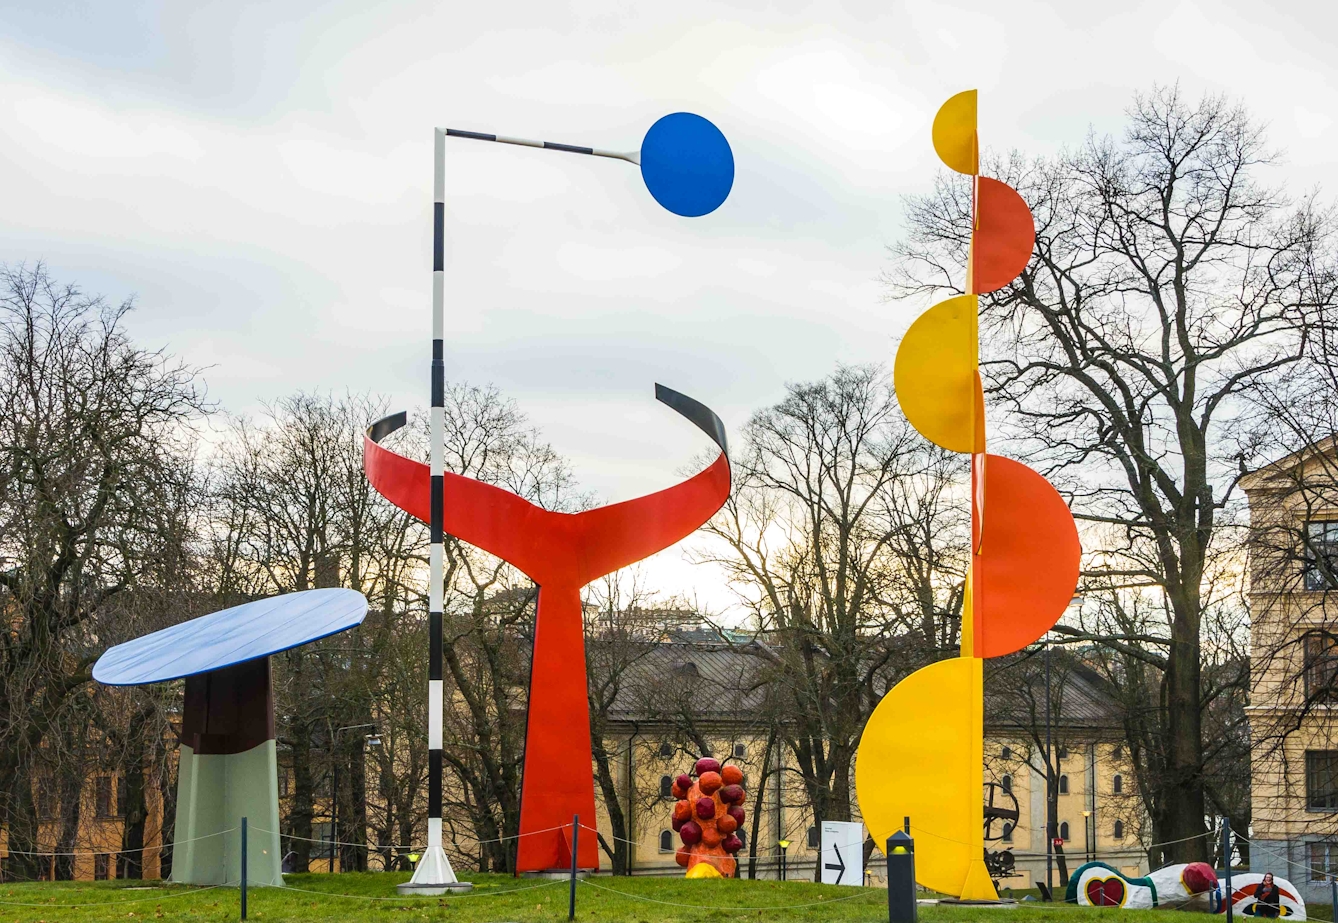 A large multipart open-air sculpture, featuring metal shapes includiding circles and semi-circles in orange, yellow, red and blue.